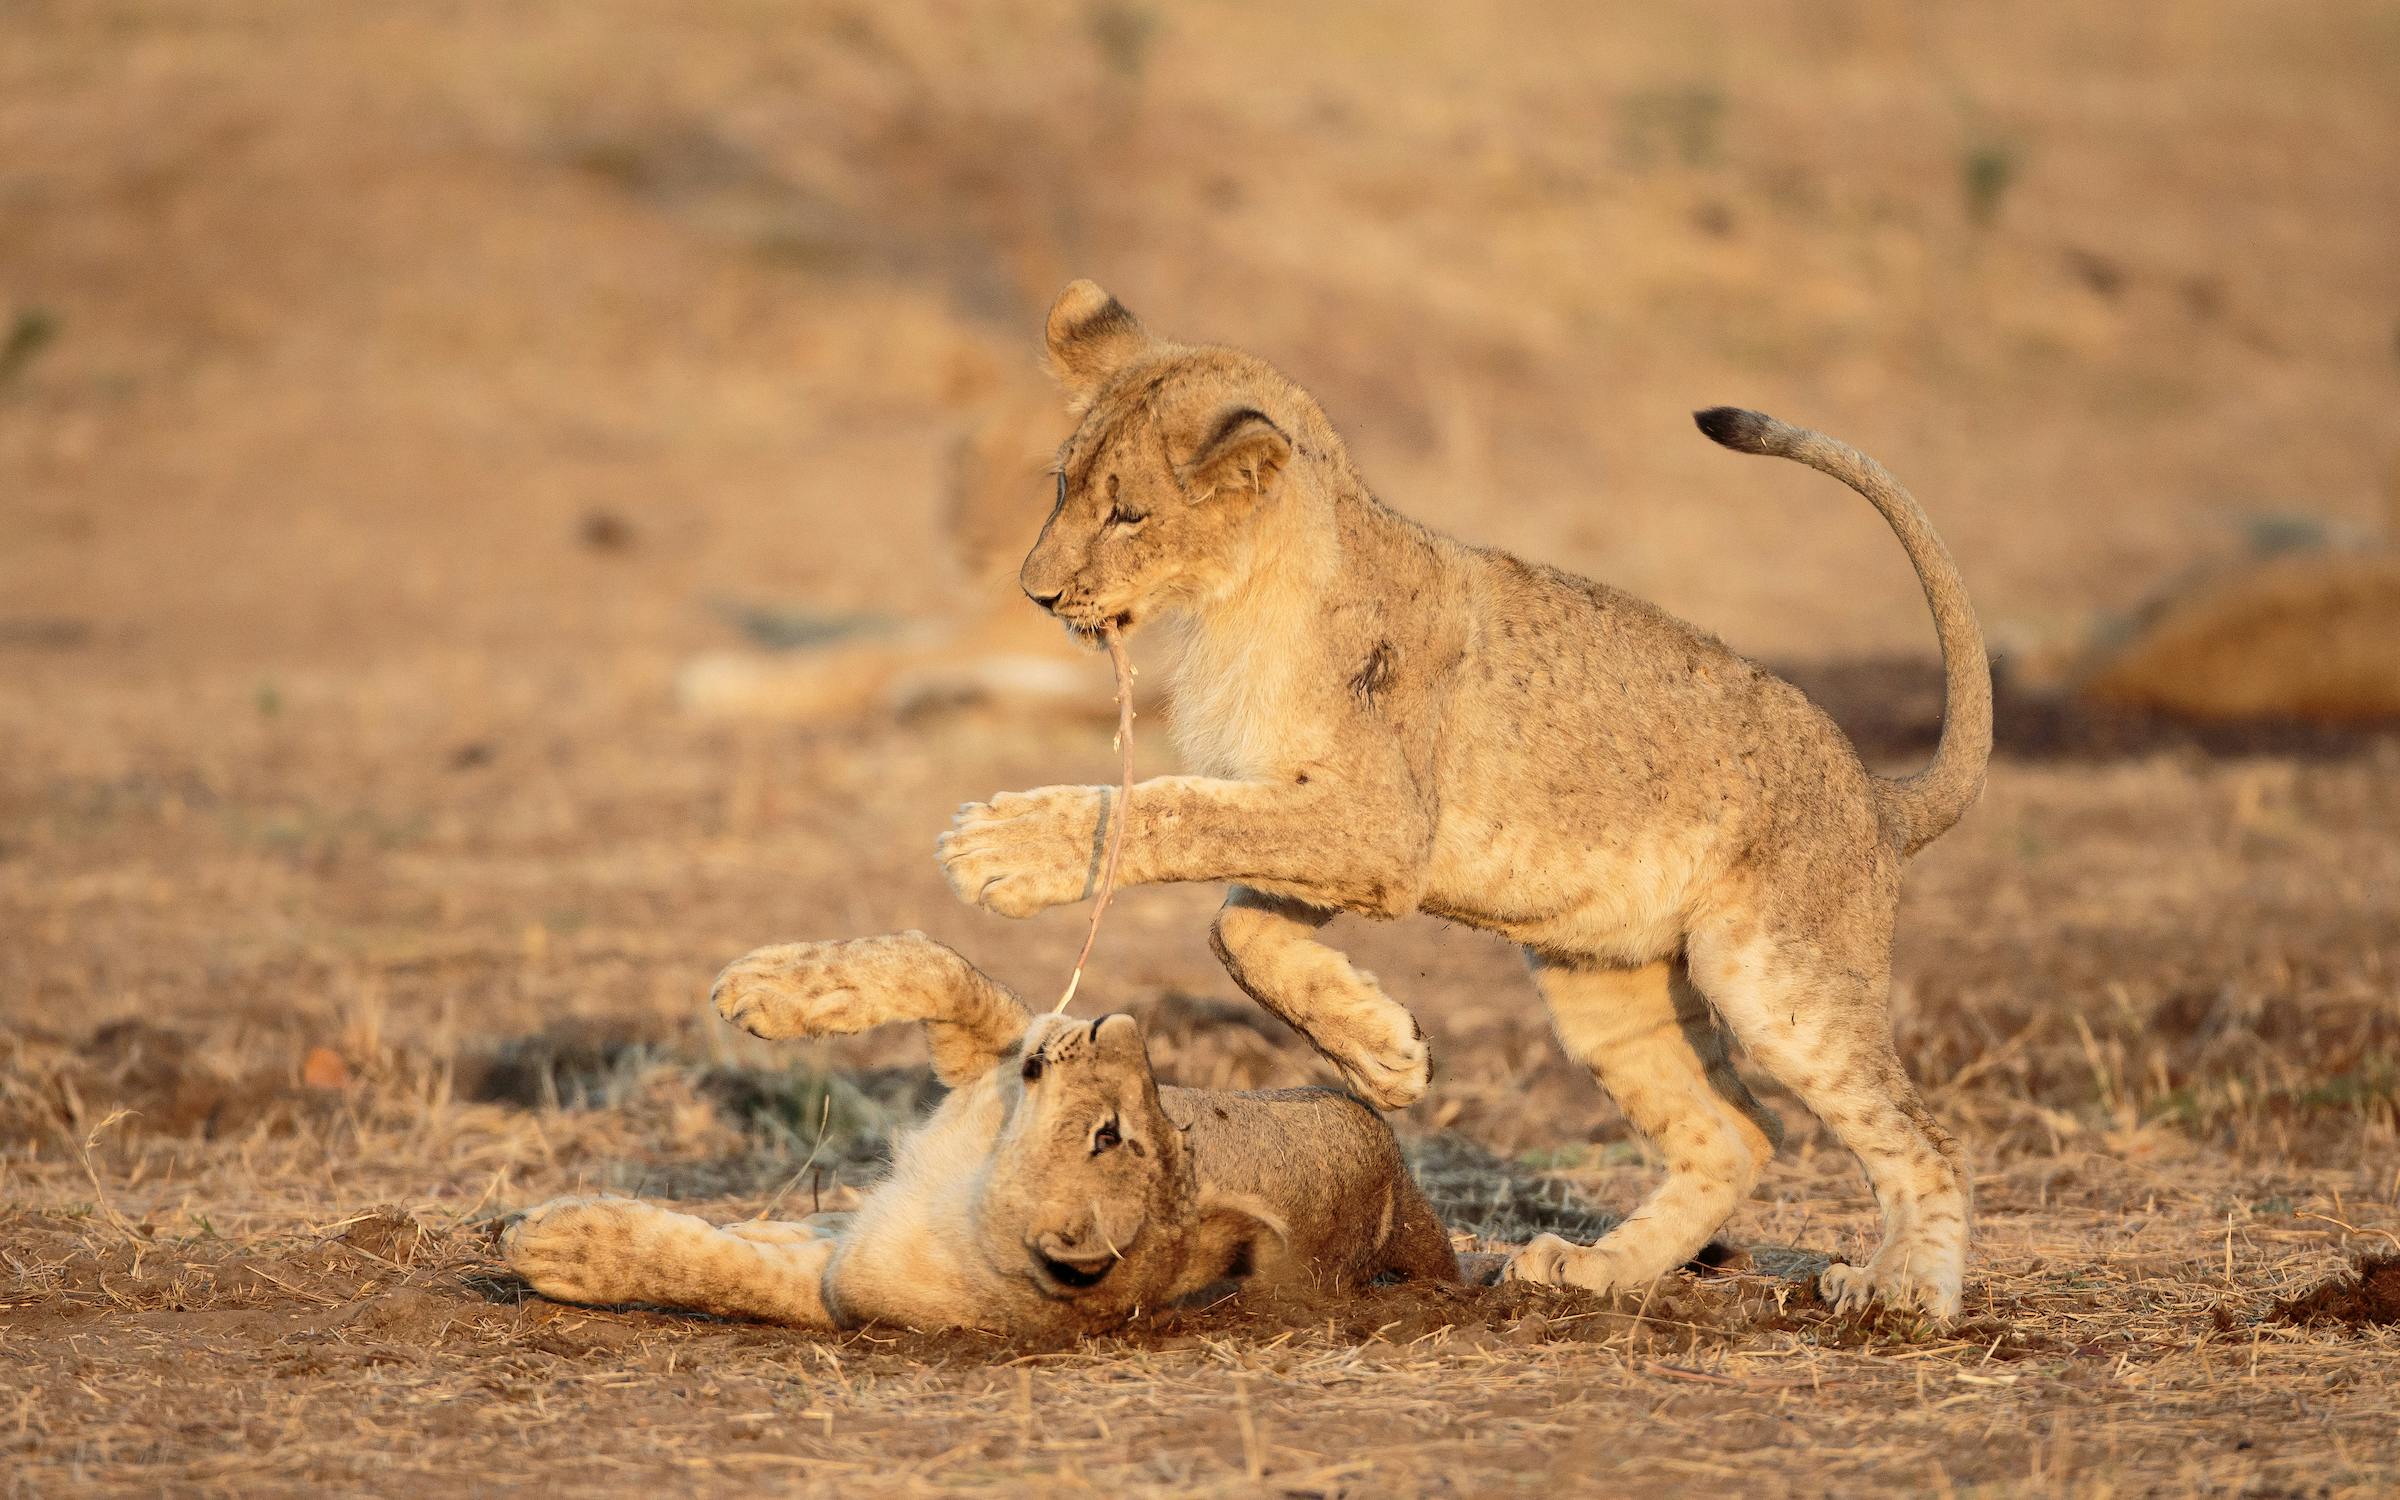 An assessment of current threats to the lion population in Waza National Park